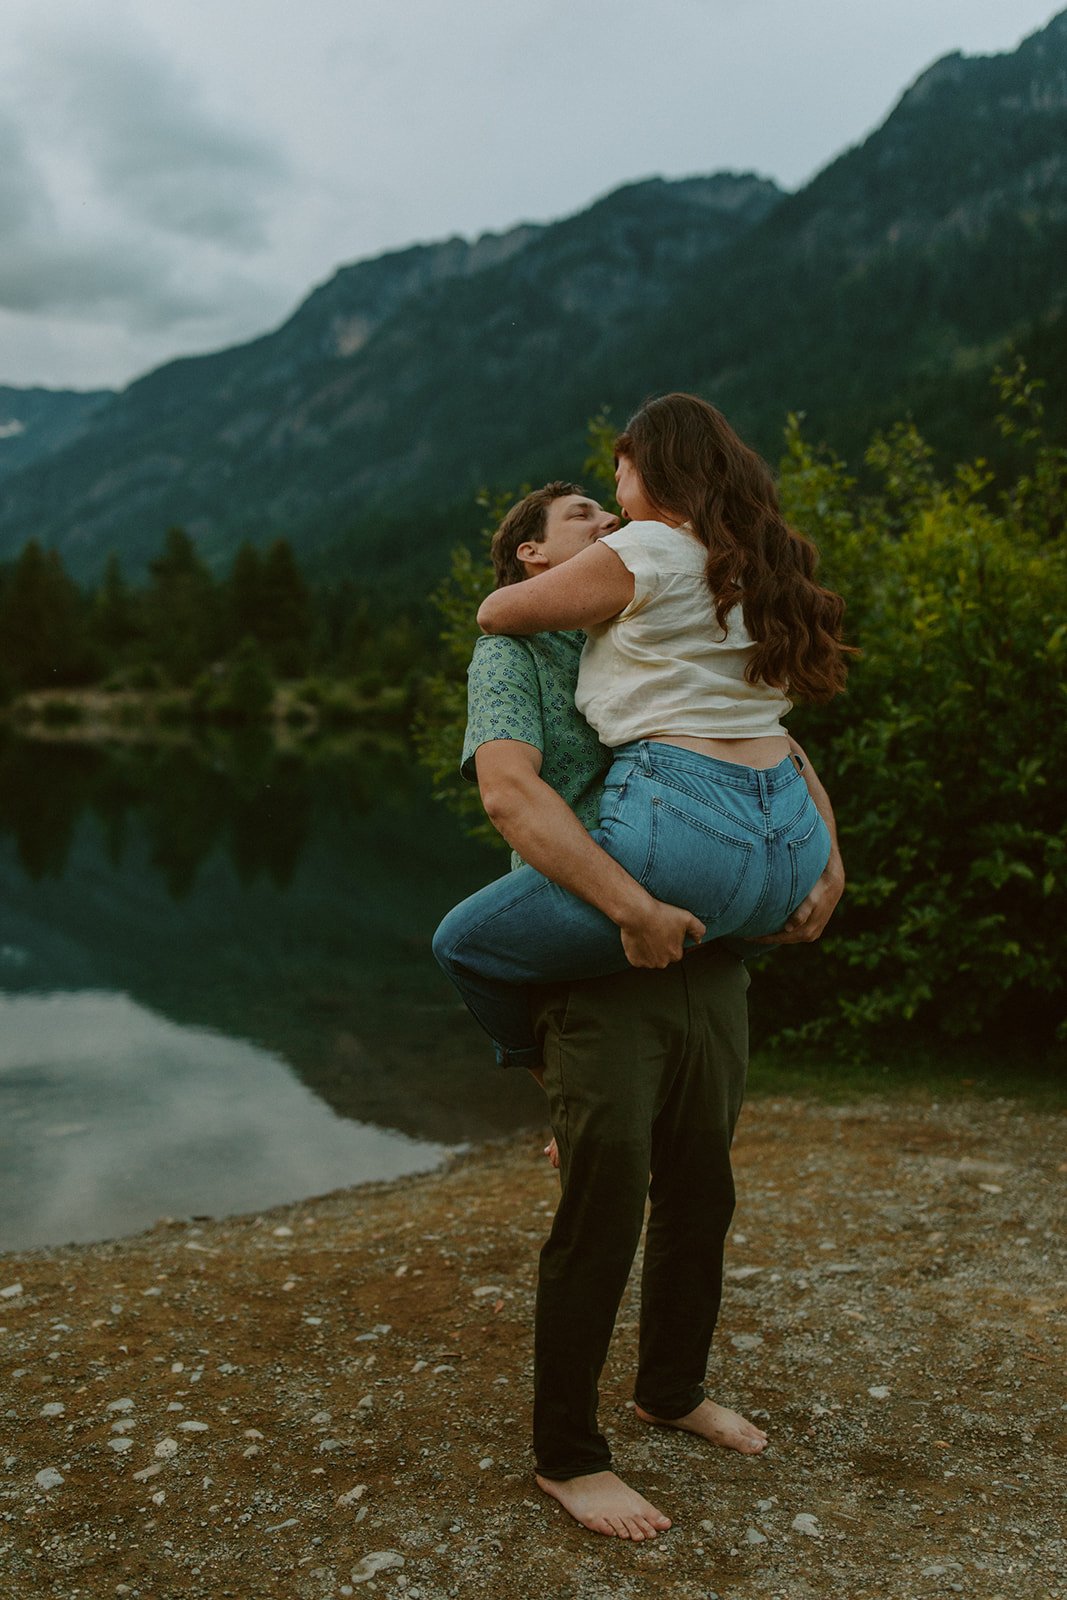 A Gold Creek Pond Outdoor Engagement Session - Shanean + Ian (131).jpg